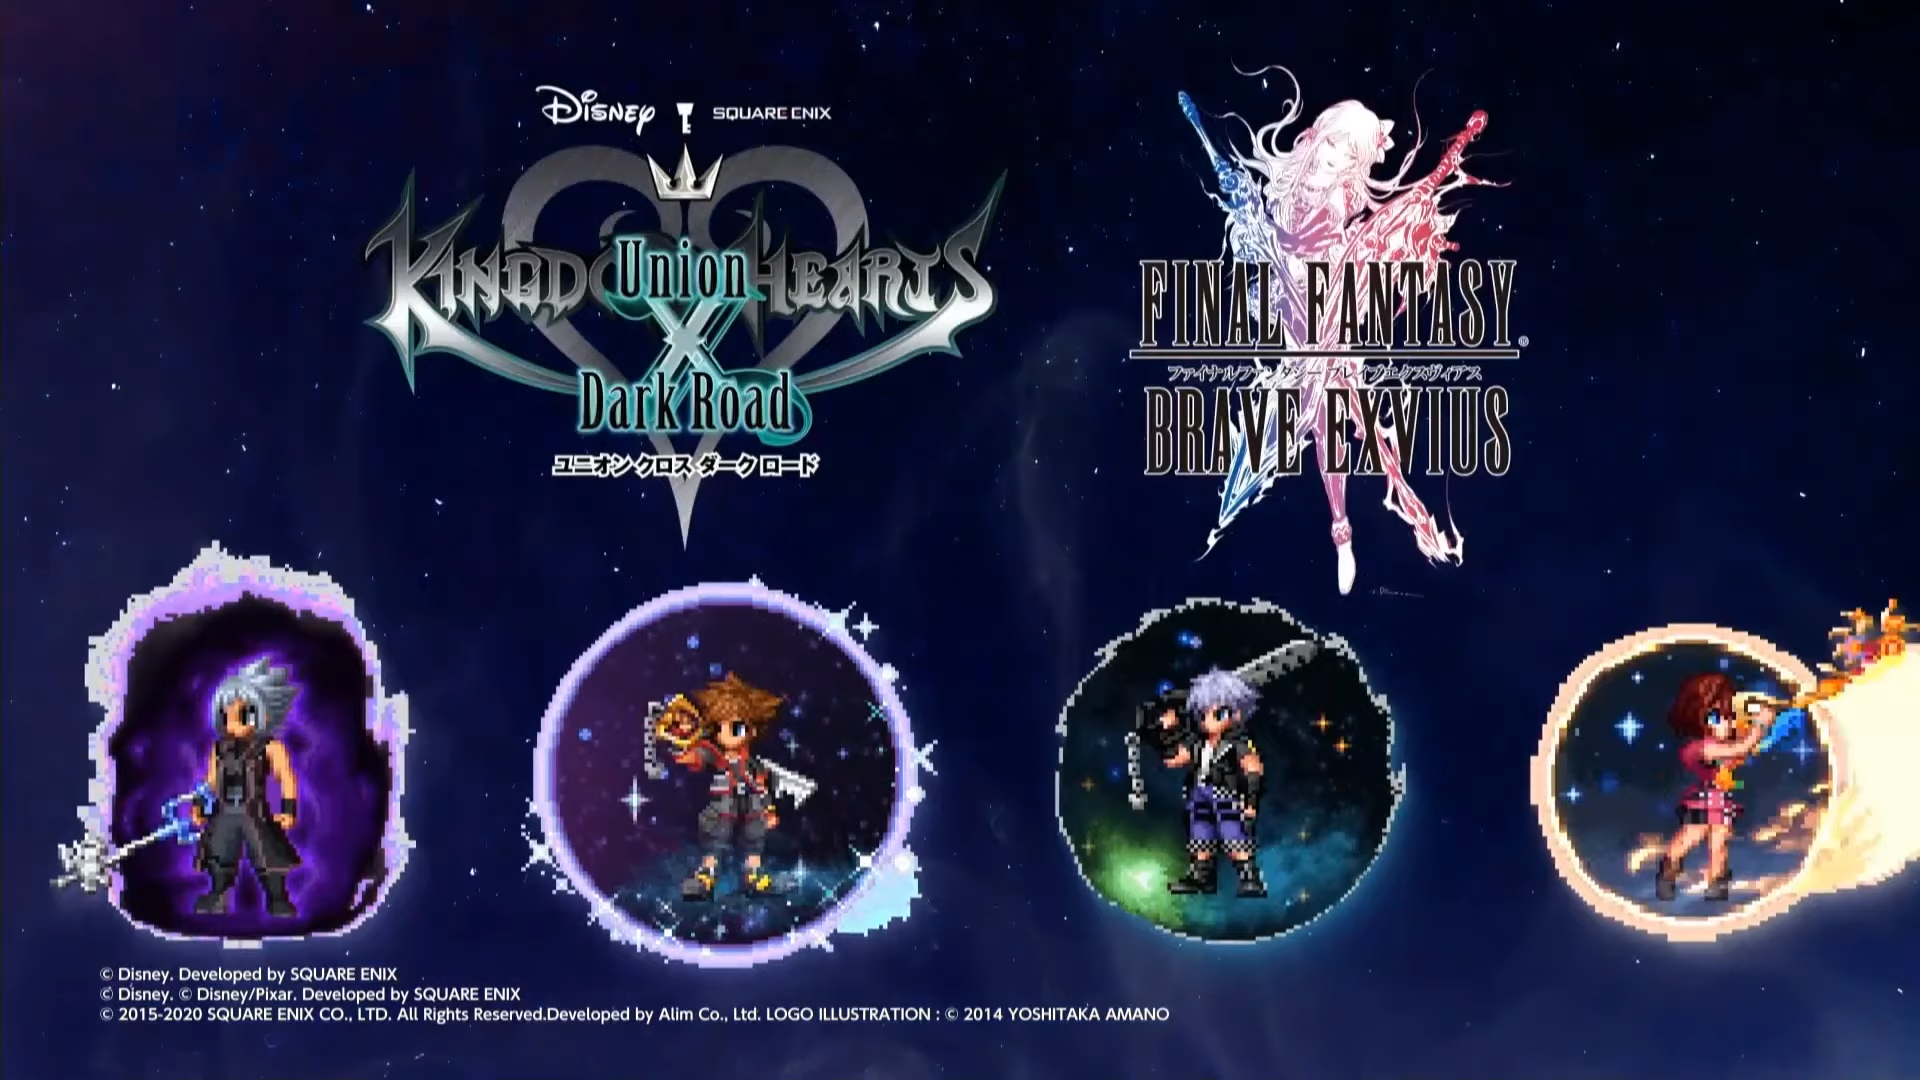 Square Enix TGS 2020 Online Lineup Headlined by Kingdom Hearts